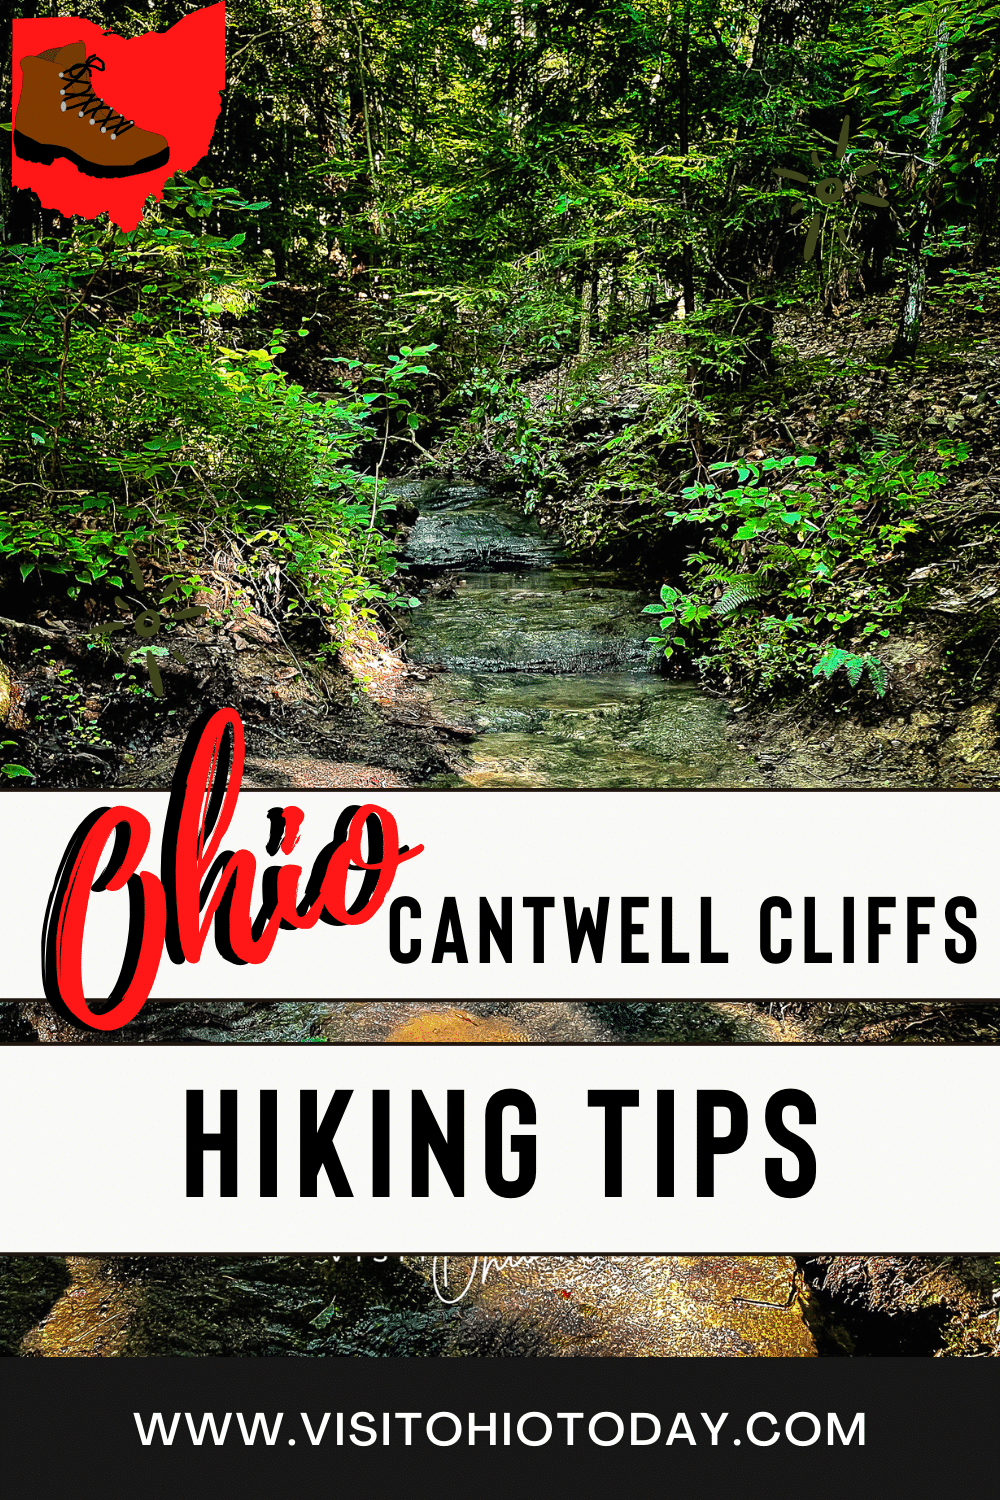 Cantwell Cliffs are in a stunning area of Hocking Hills, which is part of the Allegheny Plateau and situated primarily in Hocking County, Ohio. | Cantwell Cliffs | Hocking Hills | Hocking County